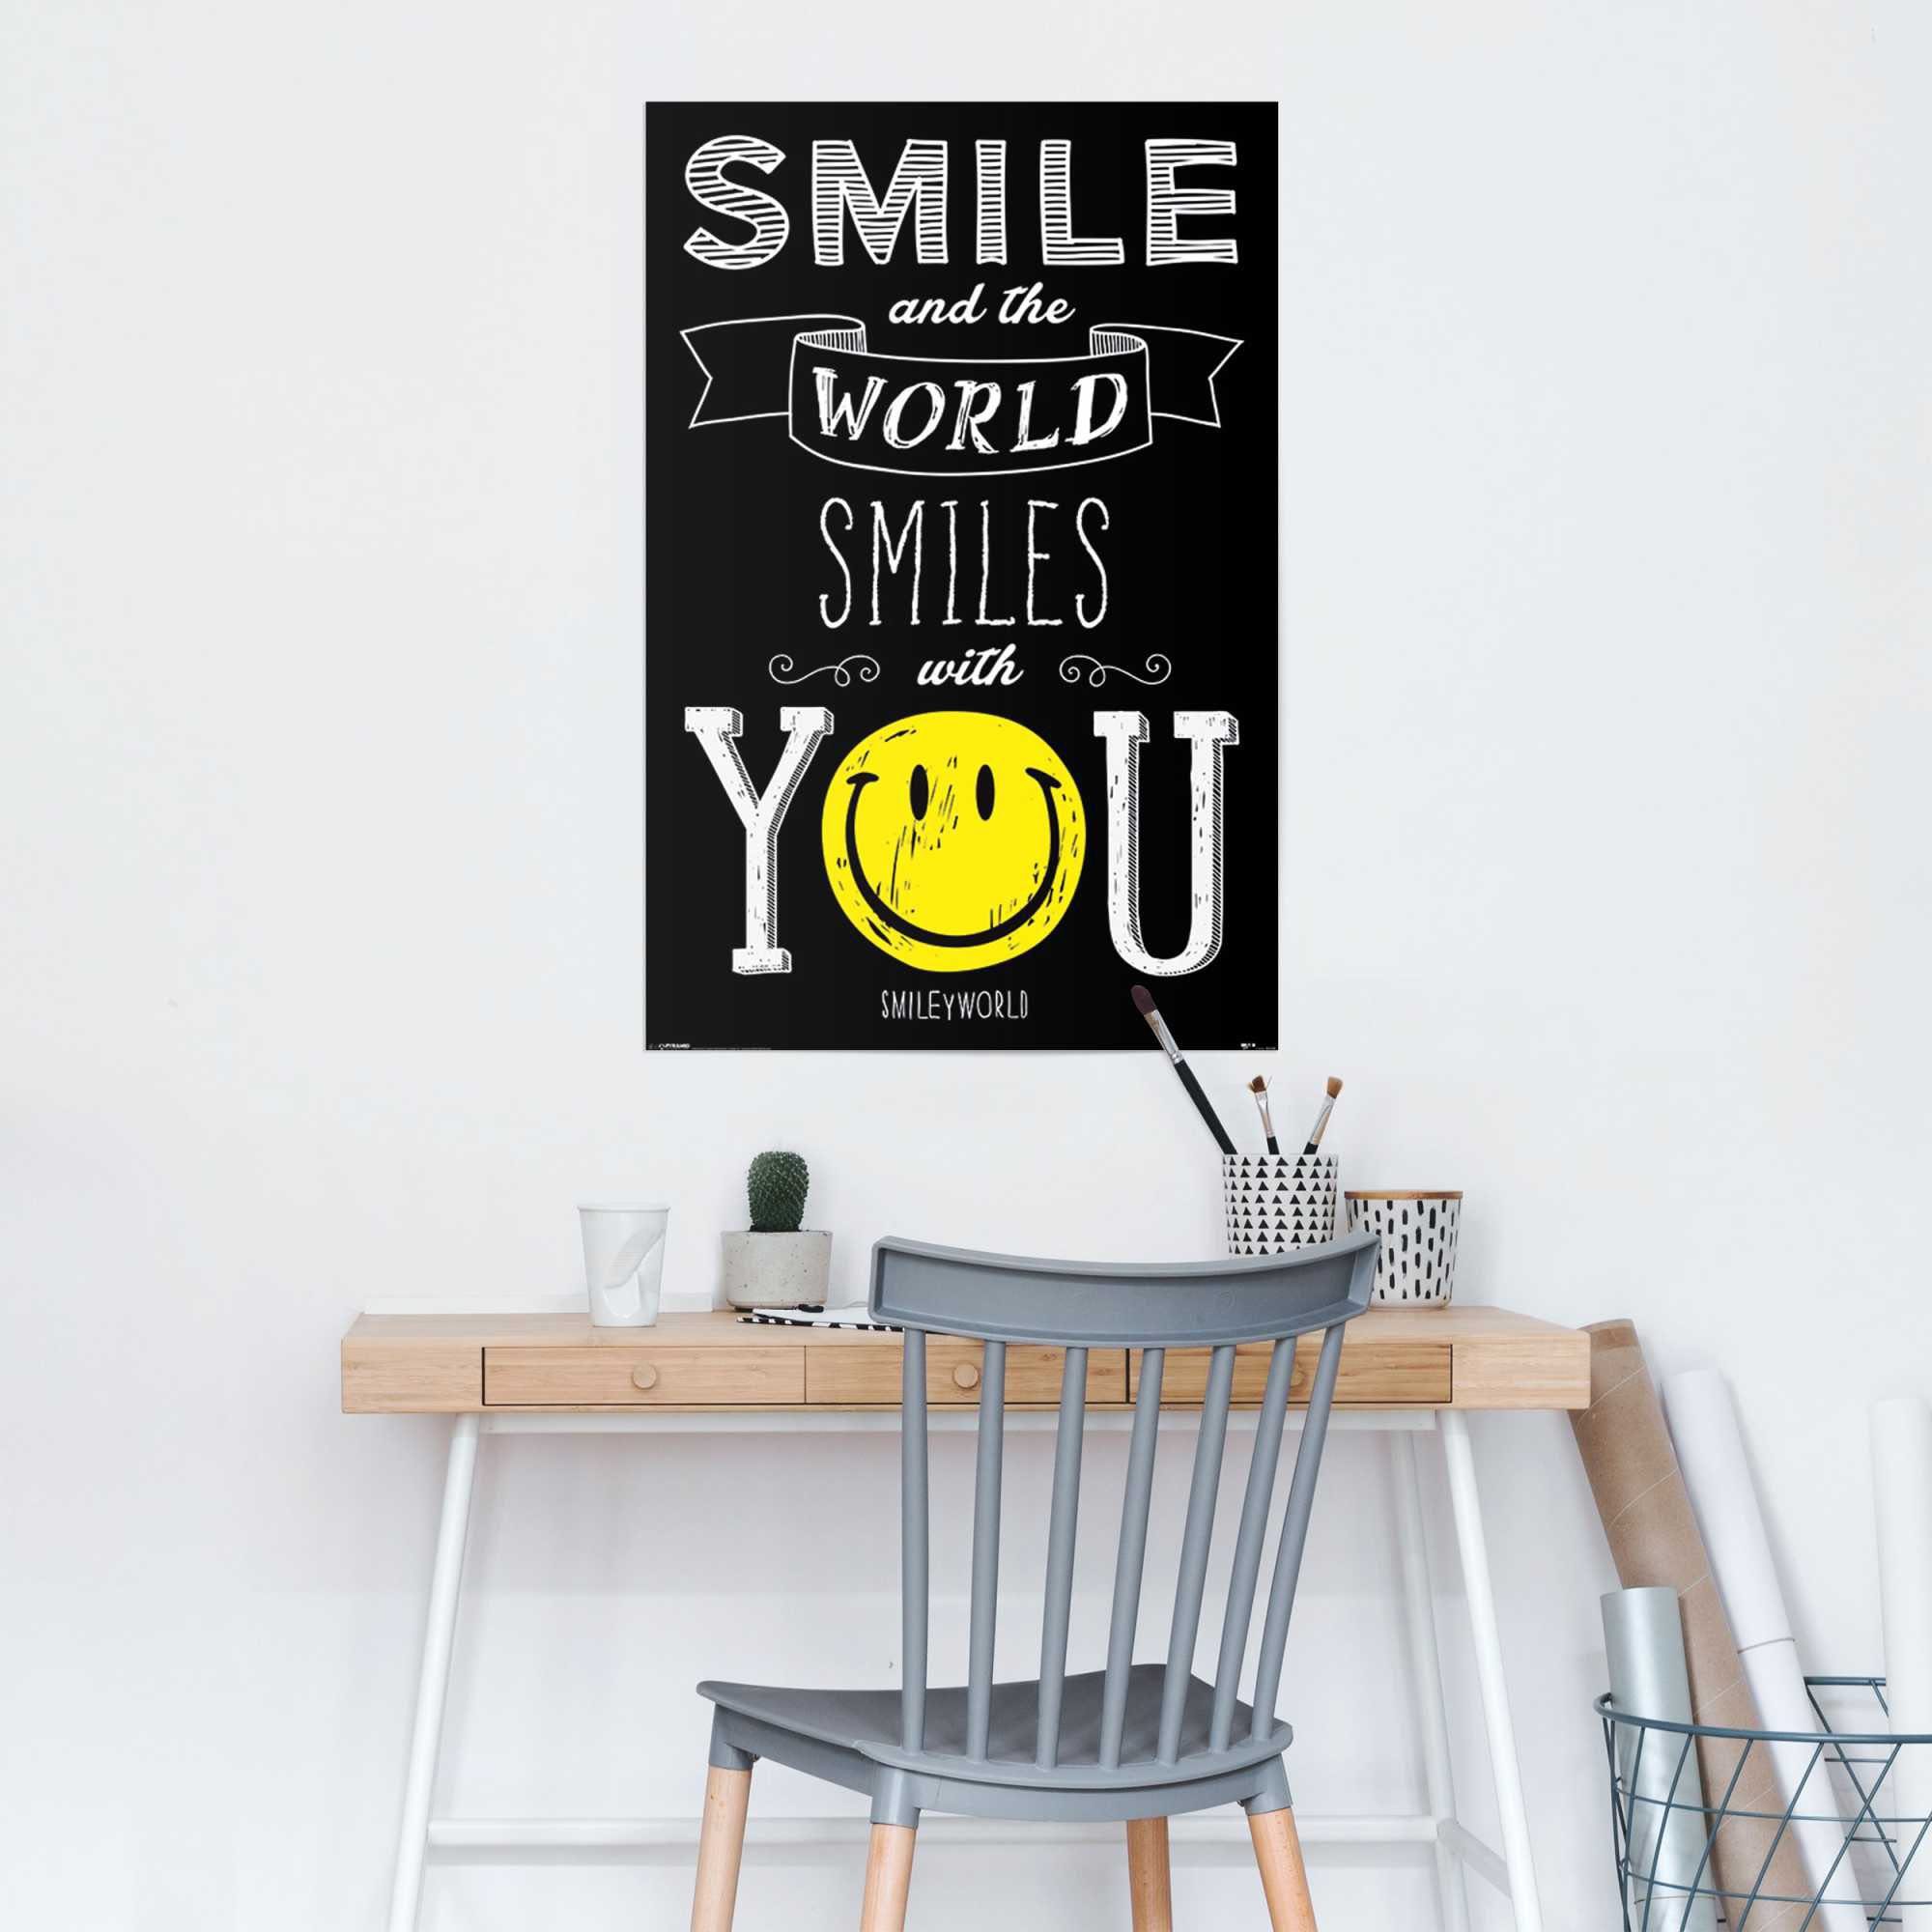 Reinders! Poster Smiley world smiles with (1 you, St)